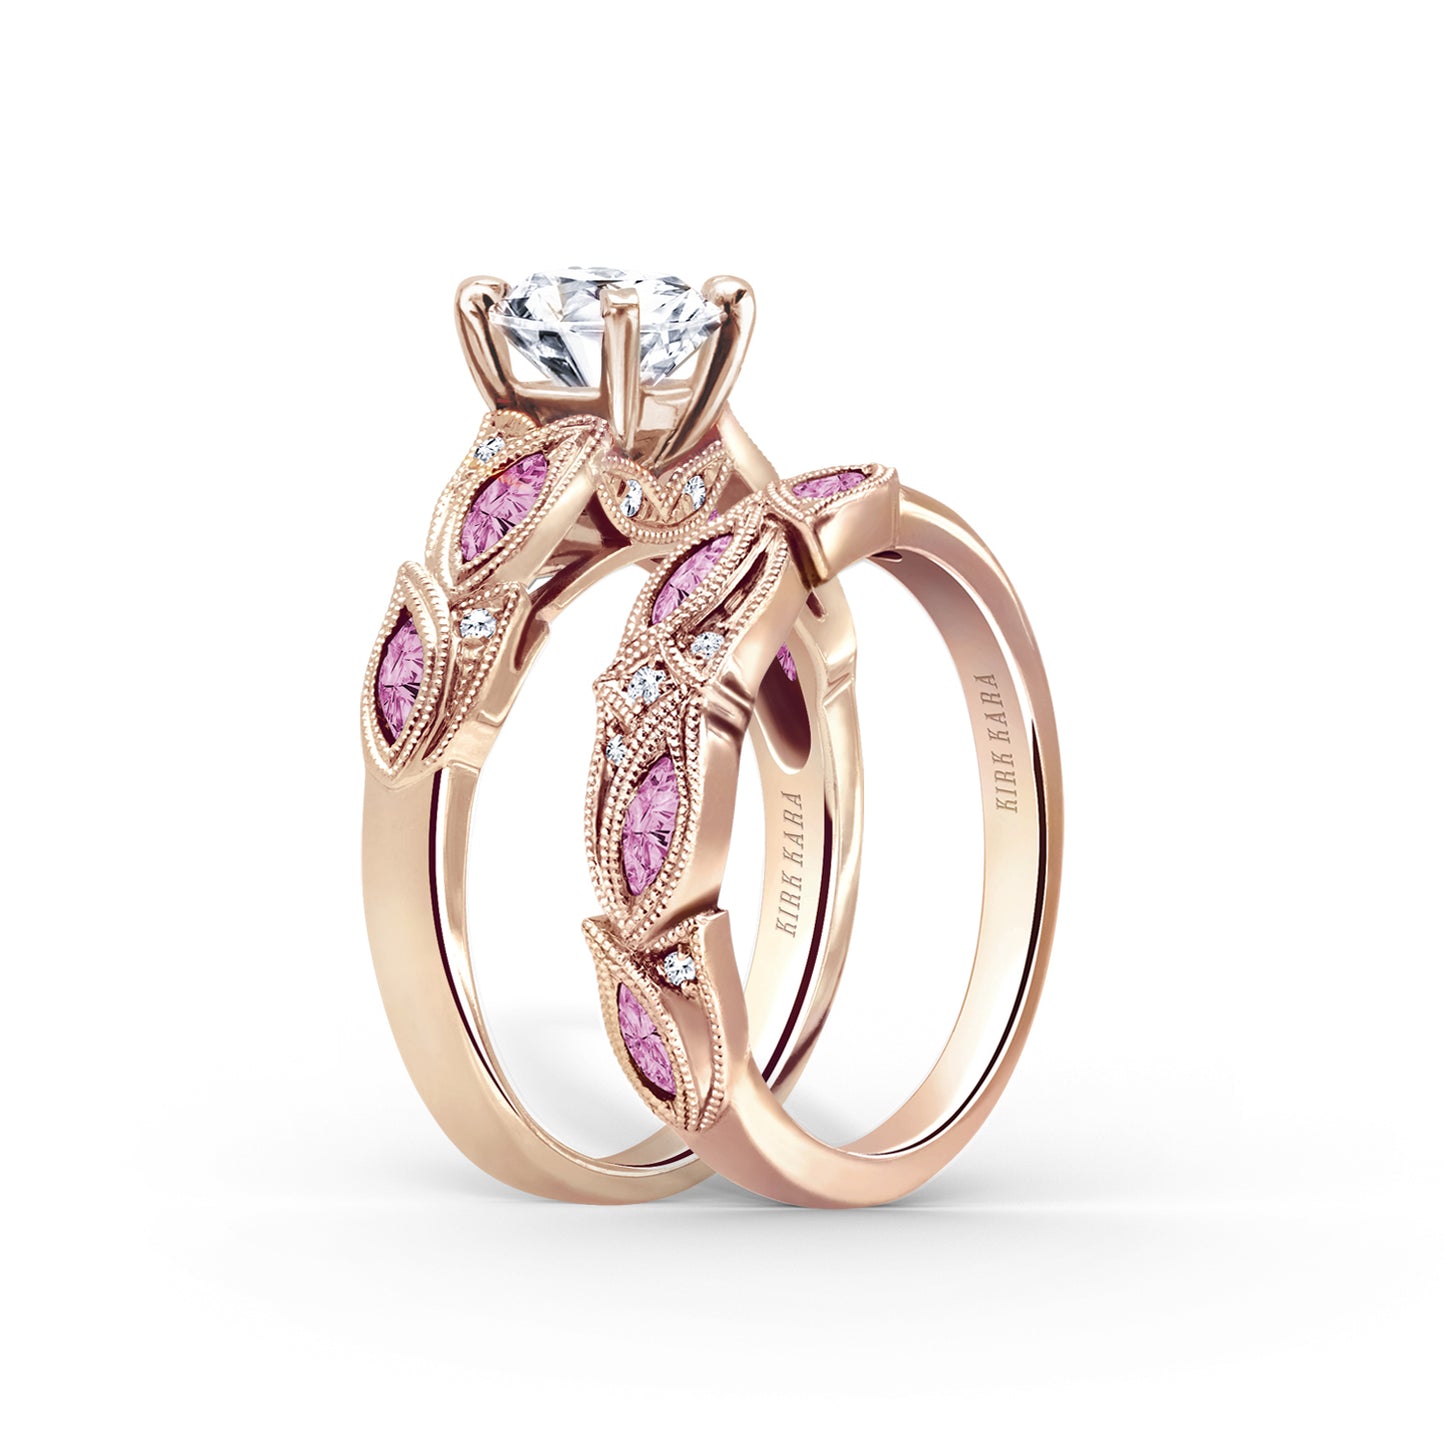 Botanical Floral Pink Sapphire Marquise Diamond Engagement Ring